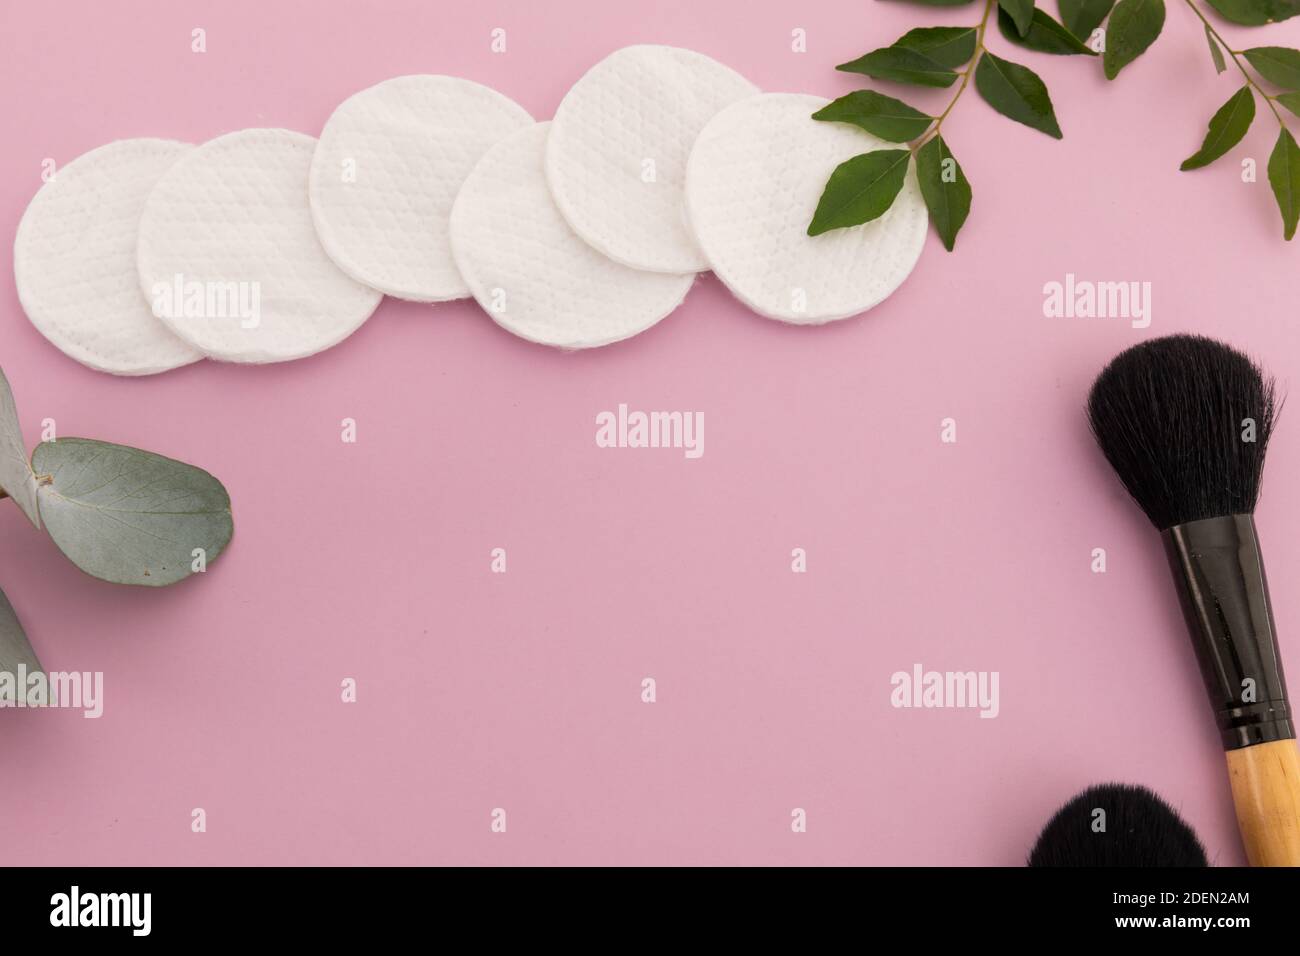 Makeup brushes, cotton pads and plants on pink background Stock Photo